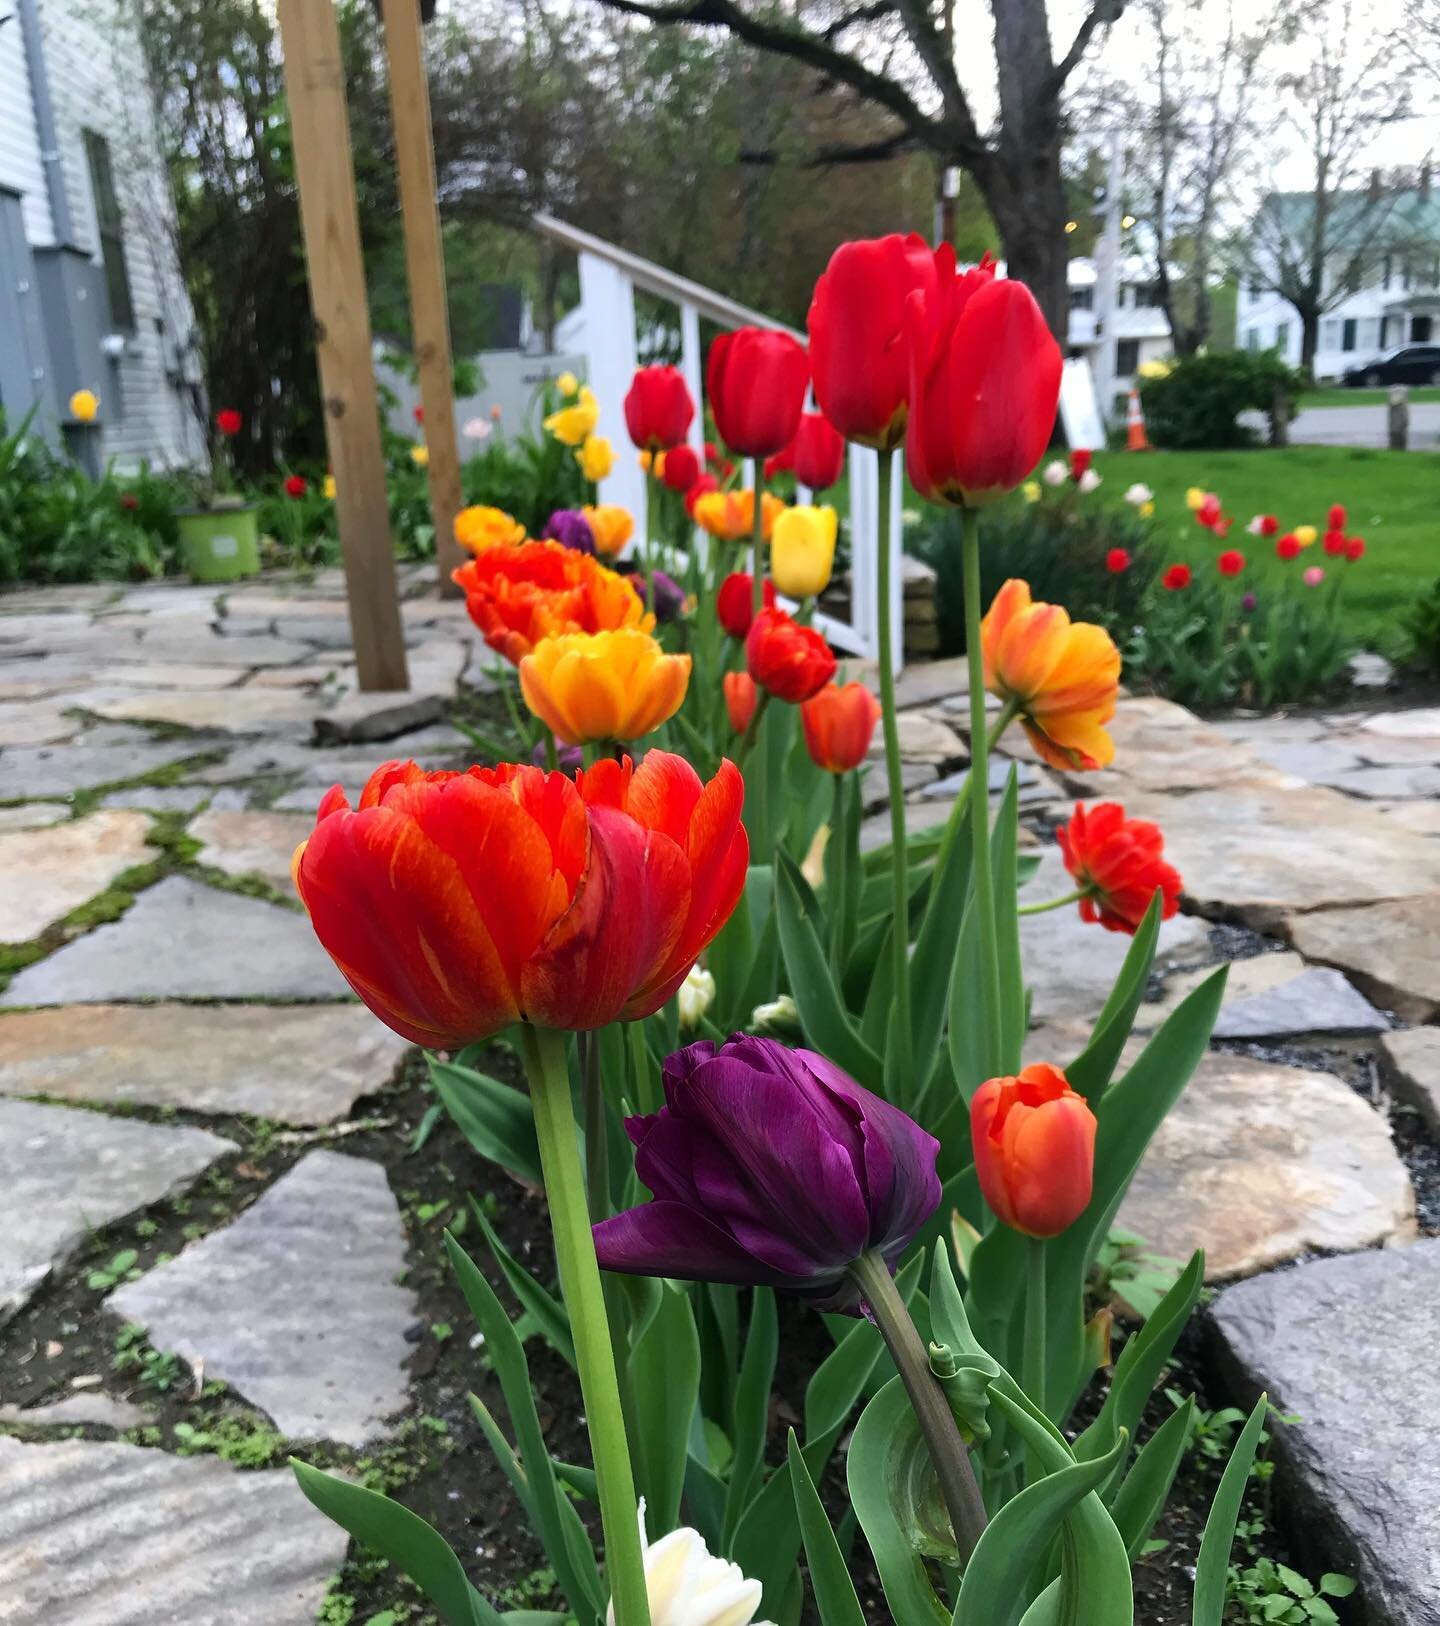 We can&rsquo;t wait to have these blooming outside our doors again! Our family and staff hope everyone is staying safe and healthy! 
#dowdscountryinn #springtime #springblooms #tulips